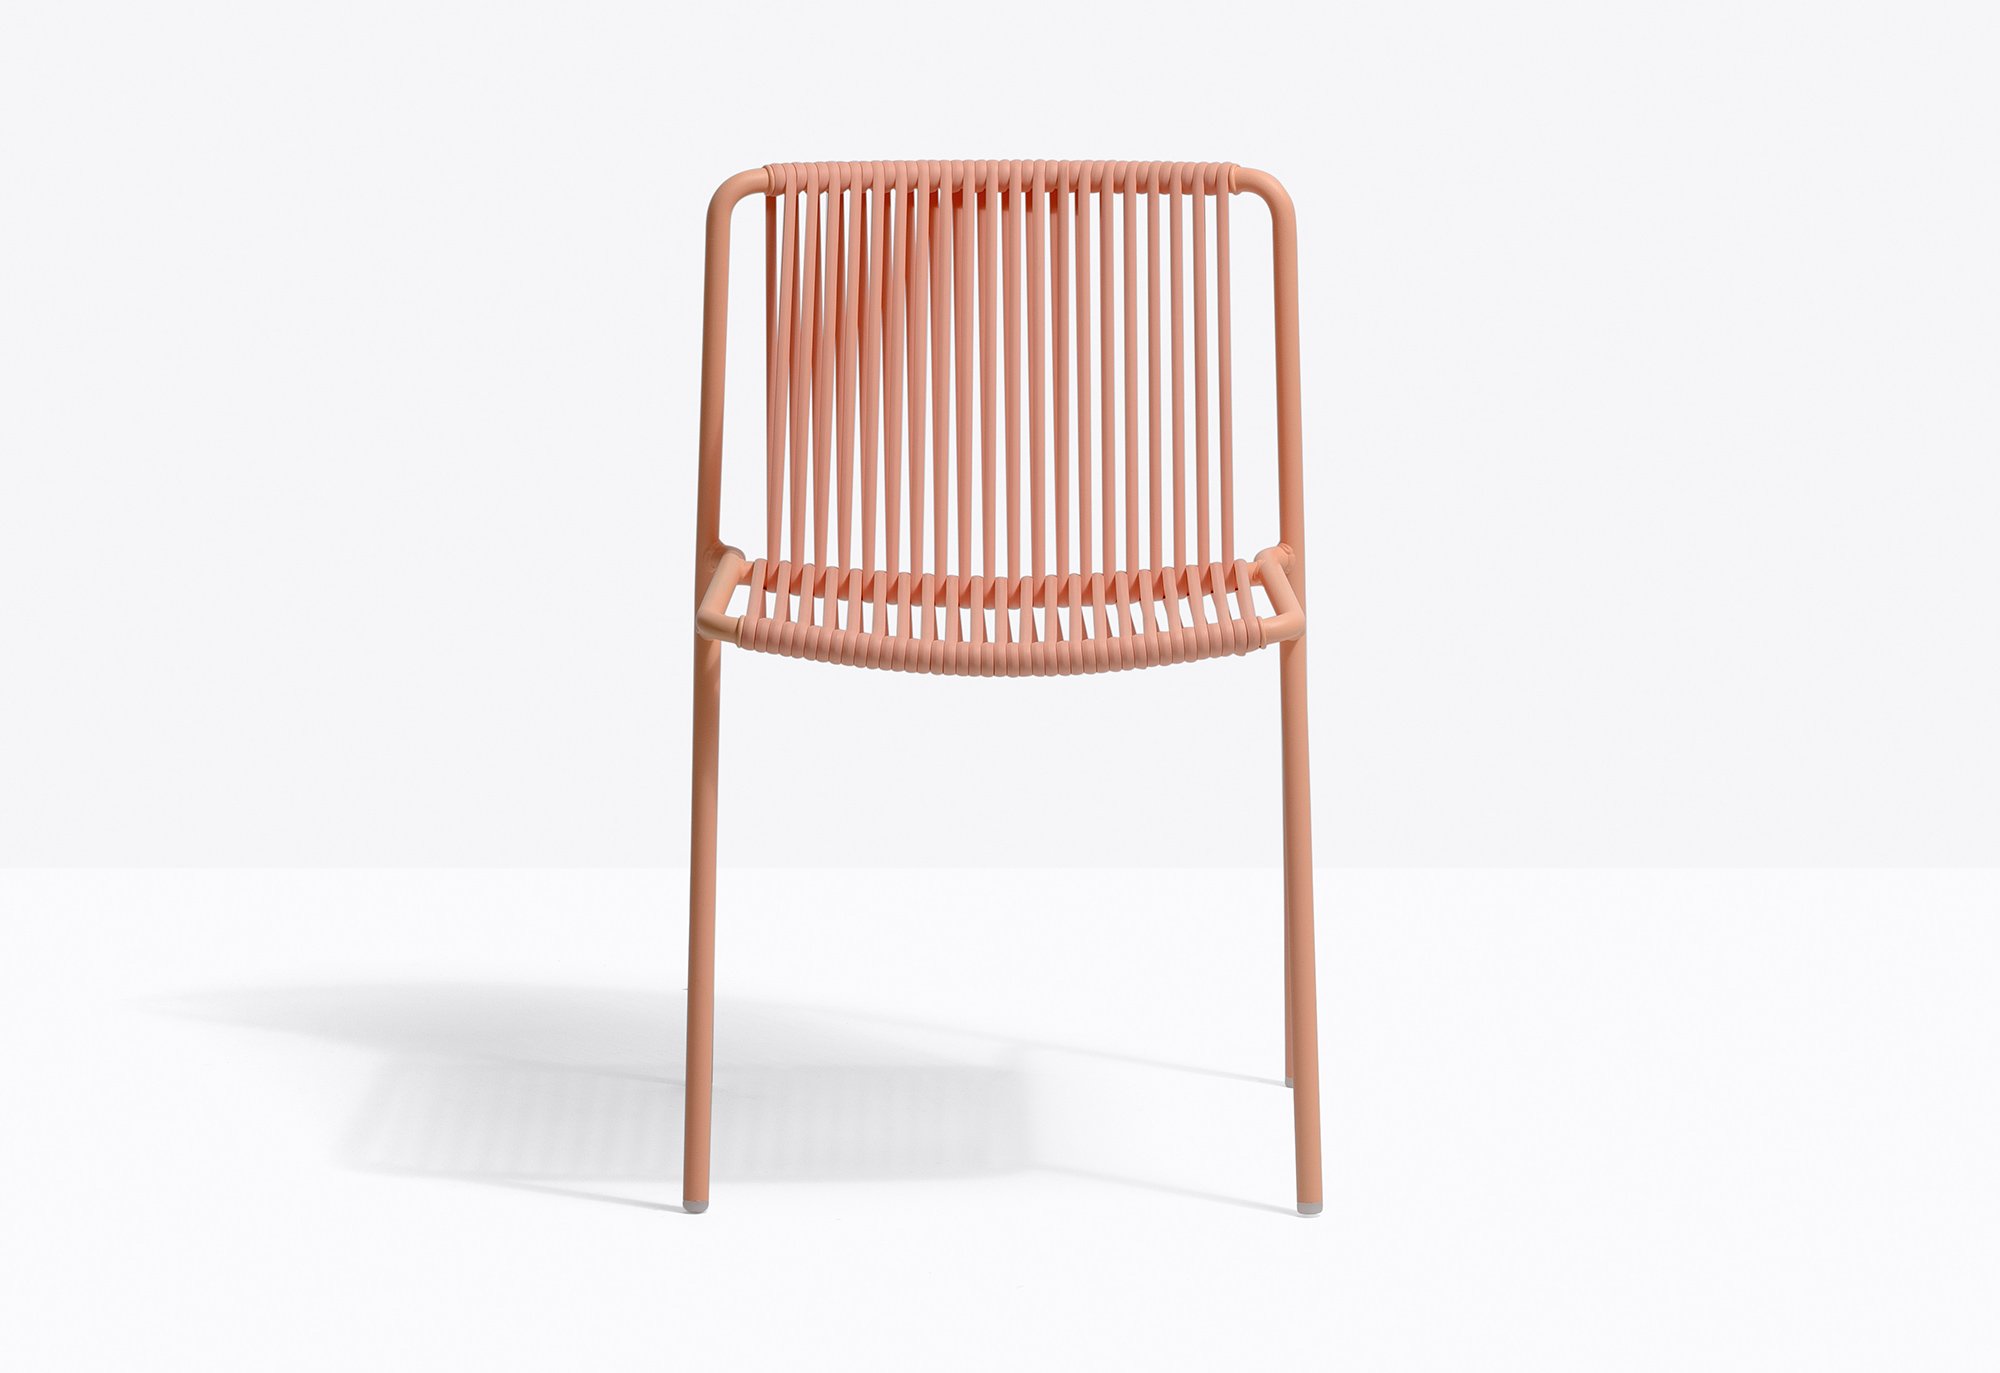 Tribeca Chair from Pedrali, designed by CMP Design